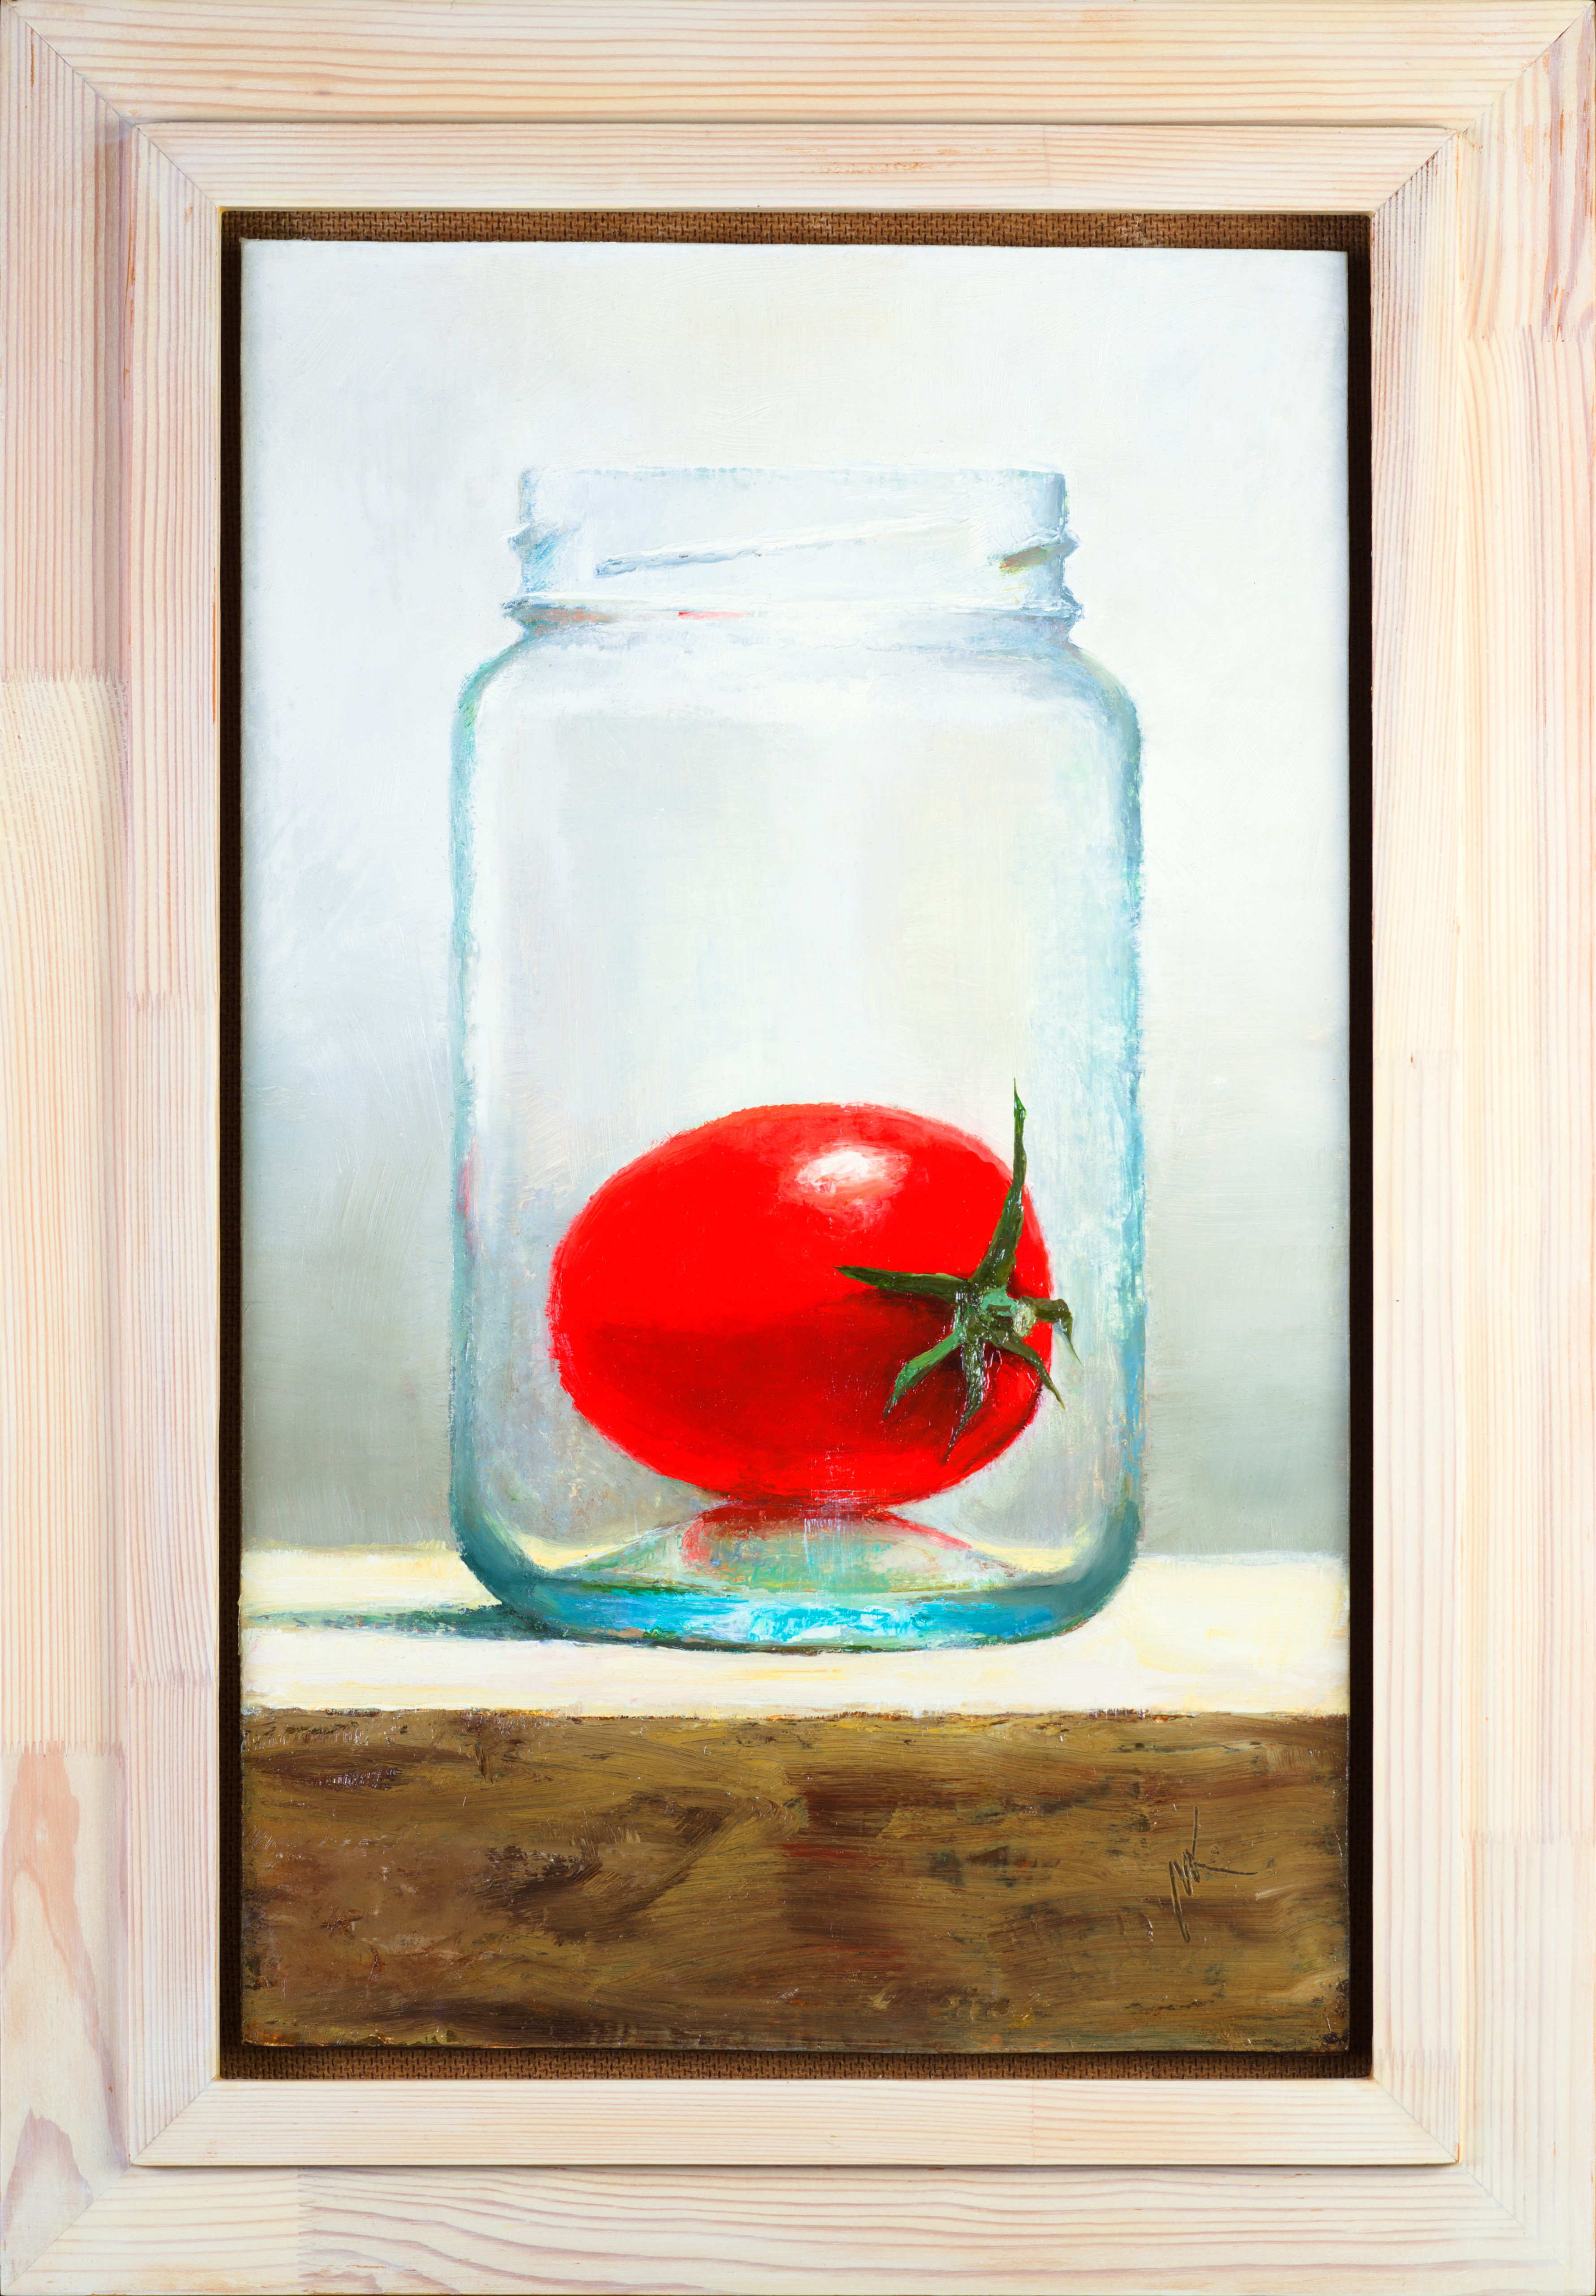 Mikhail Velavok; A Jar, 2018, Original Painting Oil, 24 x 40 cm. Artwork description: 241 Original oil painting on primed hardboard.  The artwork is being sold framed in natural light wood grain float frame 51x35,5cm.  Dimensions of artwork without the frame are 40x24,5cm.  It is wired and ready for hanging.  tomato, jar, object, still life, original oil painting, glass, transparent, ...